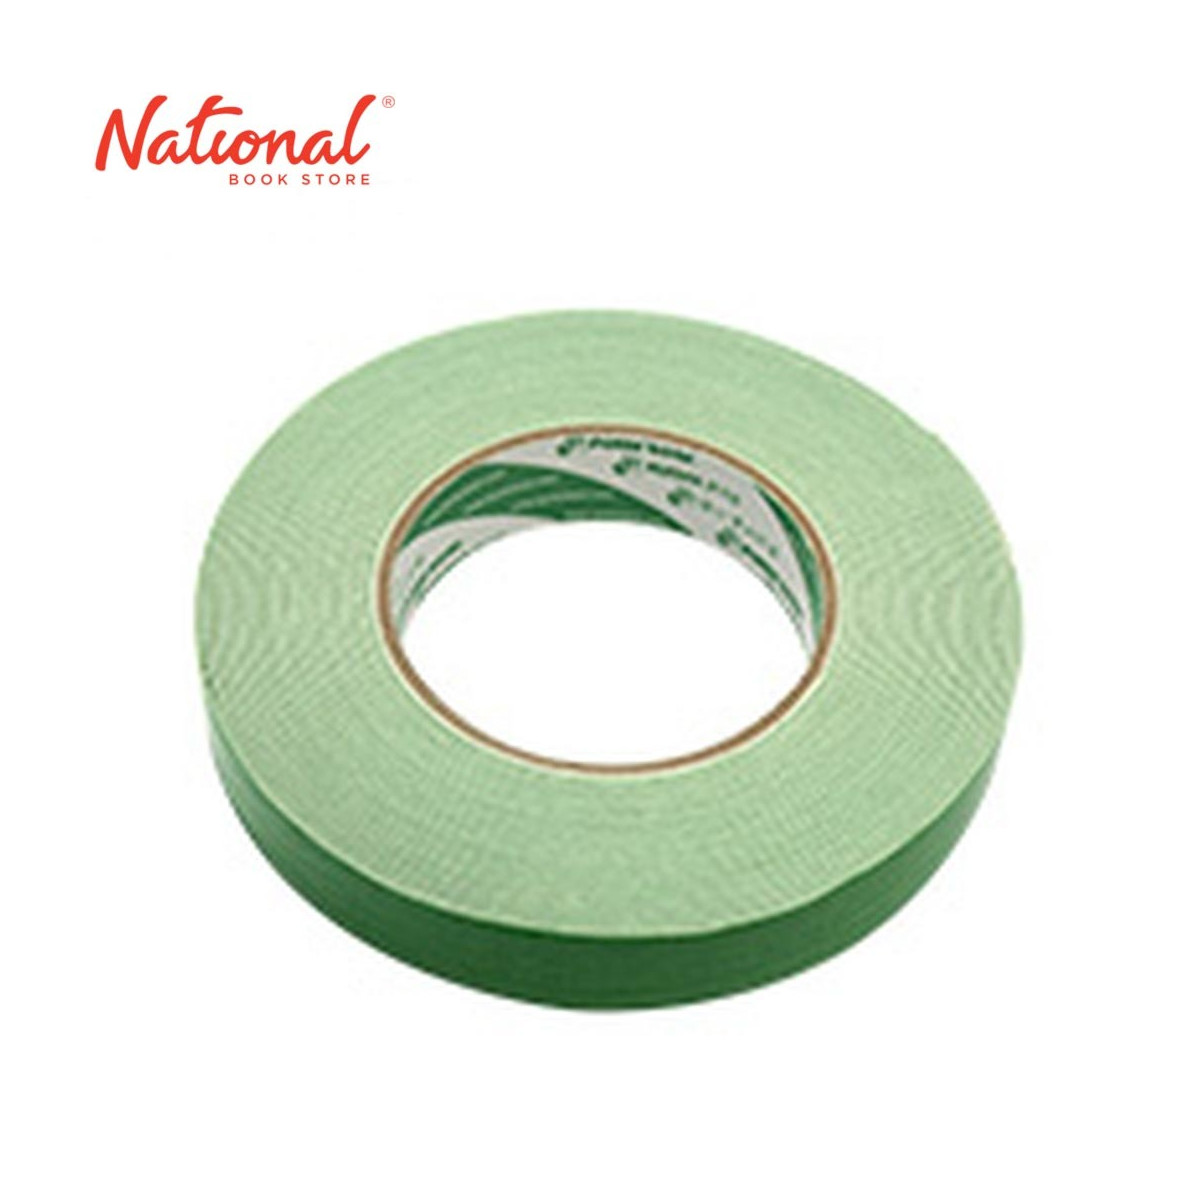 Agarwal Craft and Stationers - Foam Double Sided Tape Width - 0.5 inches  Size - small Rs 10/- per roll . . #craftathomecrafters #foam #double #side # tape #crafts #stationery #art #yellow #sticky #small #dmtoorder📩